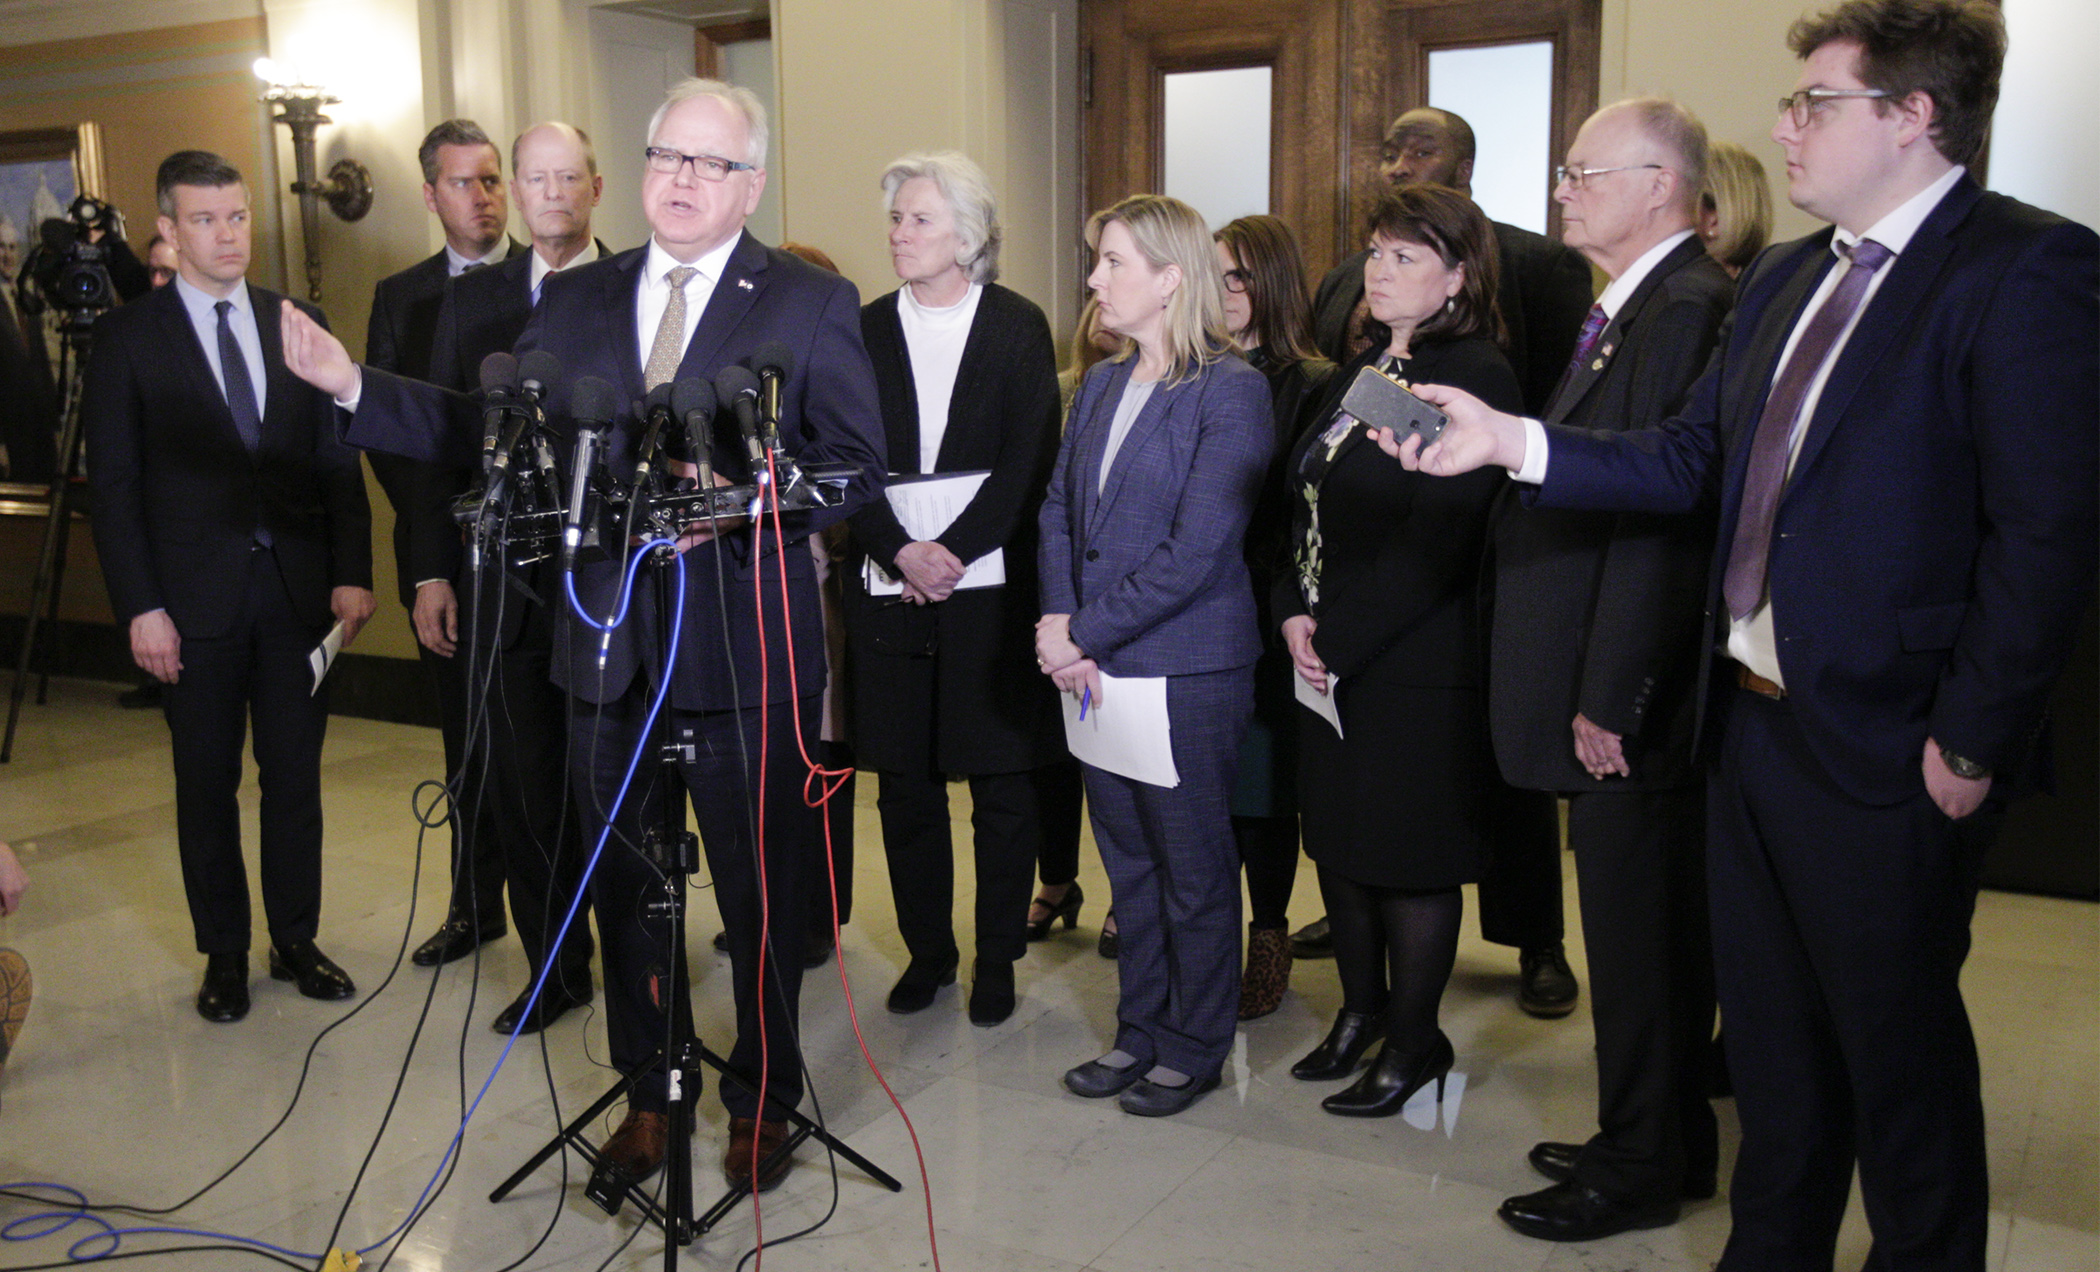 Gov. Tim Walz, state health officials and legislative leaders held a news conference March 2 to address the state's preparations for the potential spread of the COVID-19 virus in Minnesota. Photo by Paul Battaglia